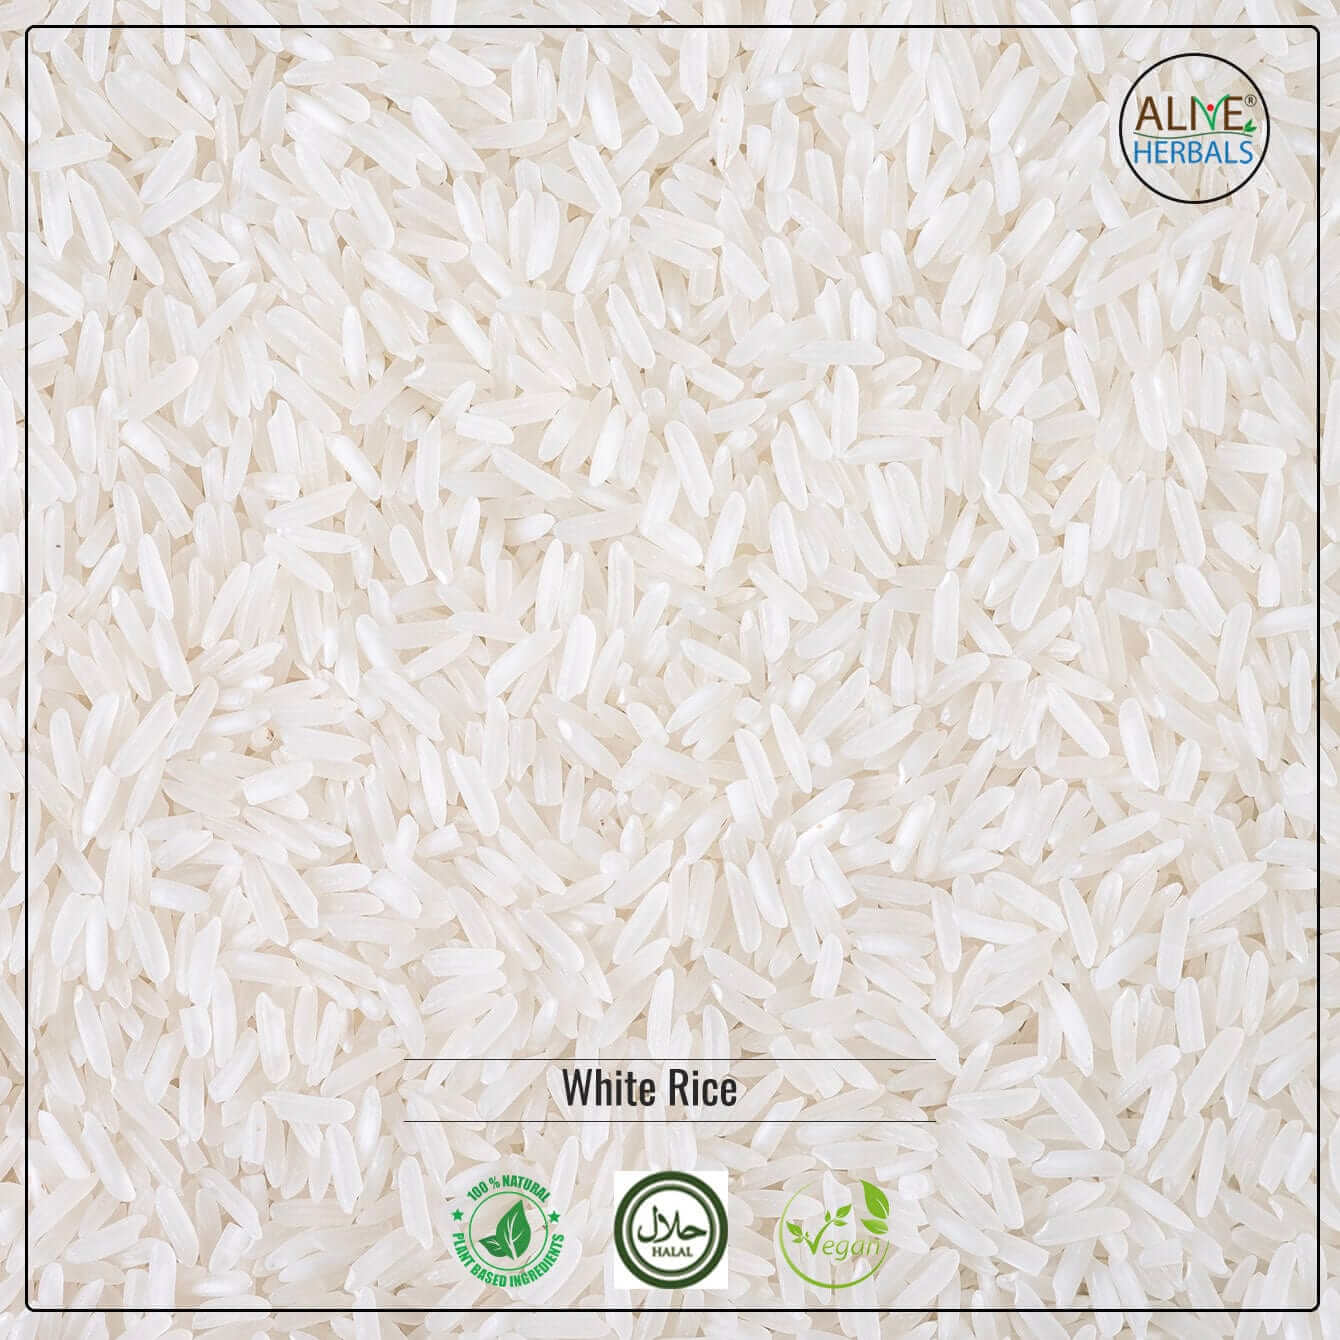 White Rice - Shop at Natural Food Store | Alive Herbals.